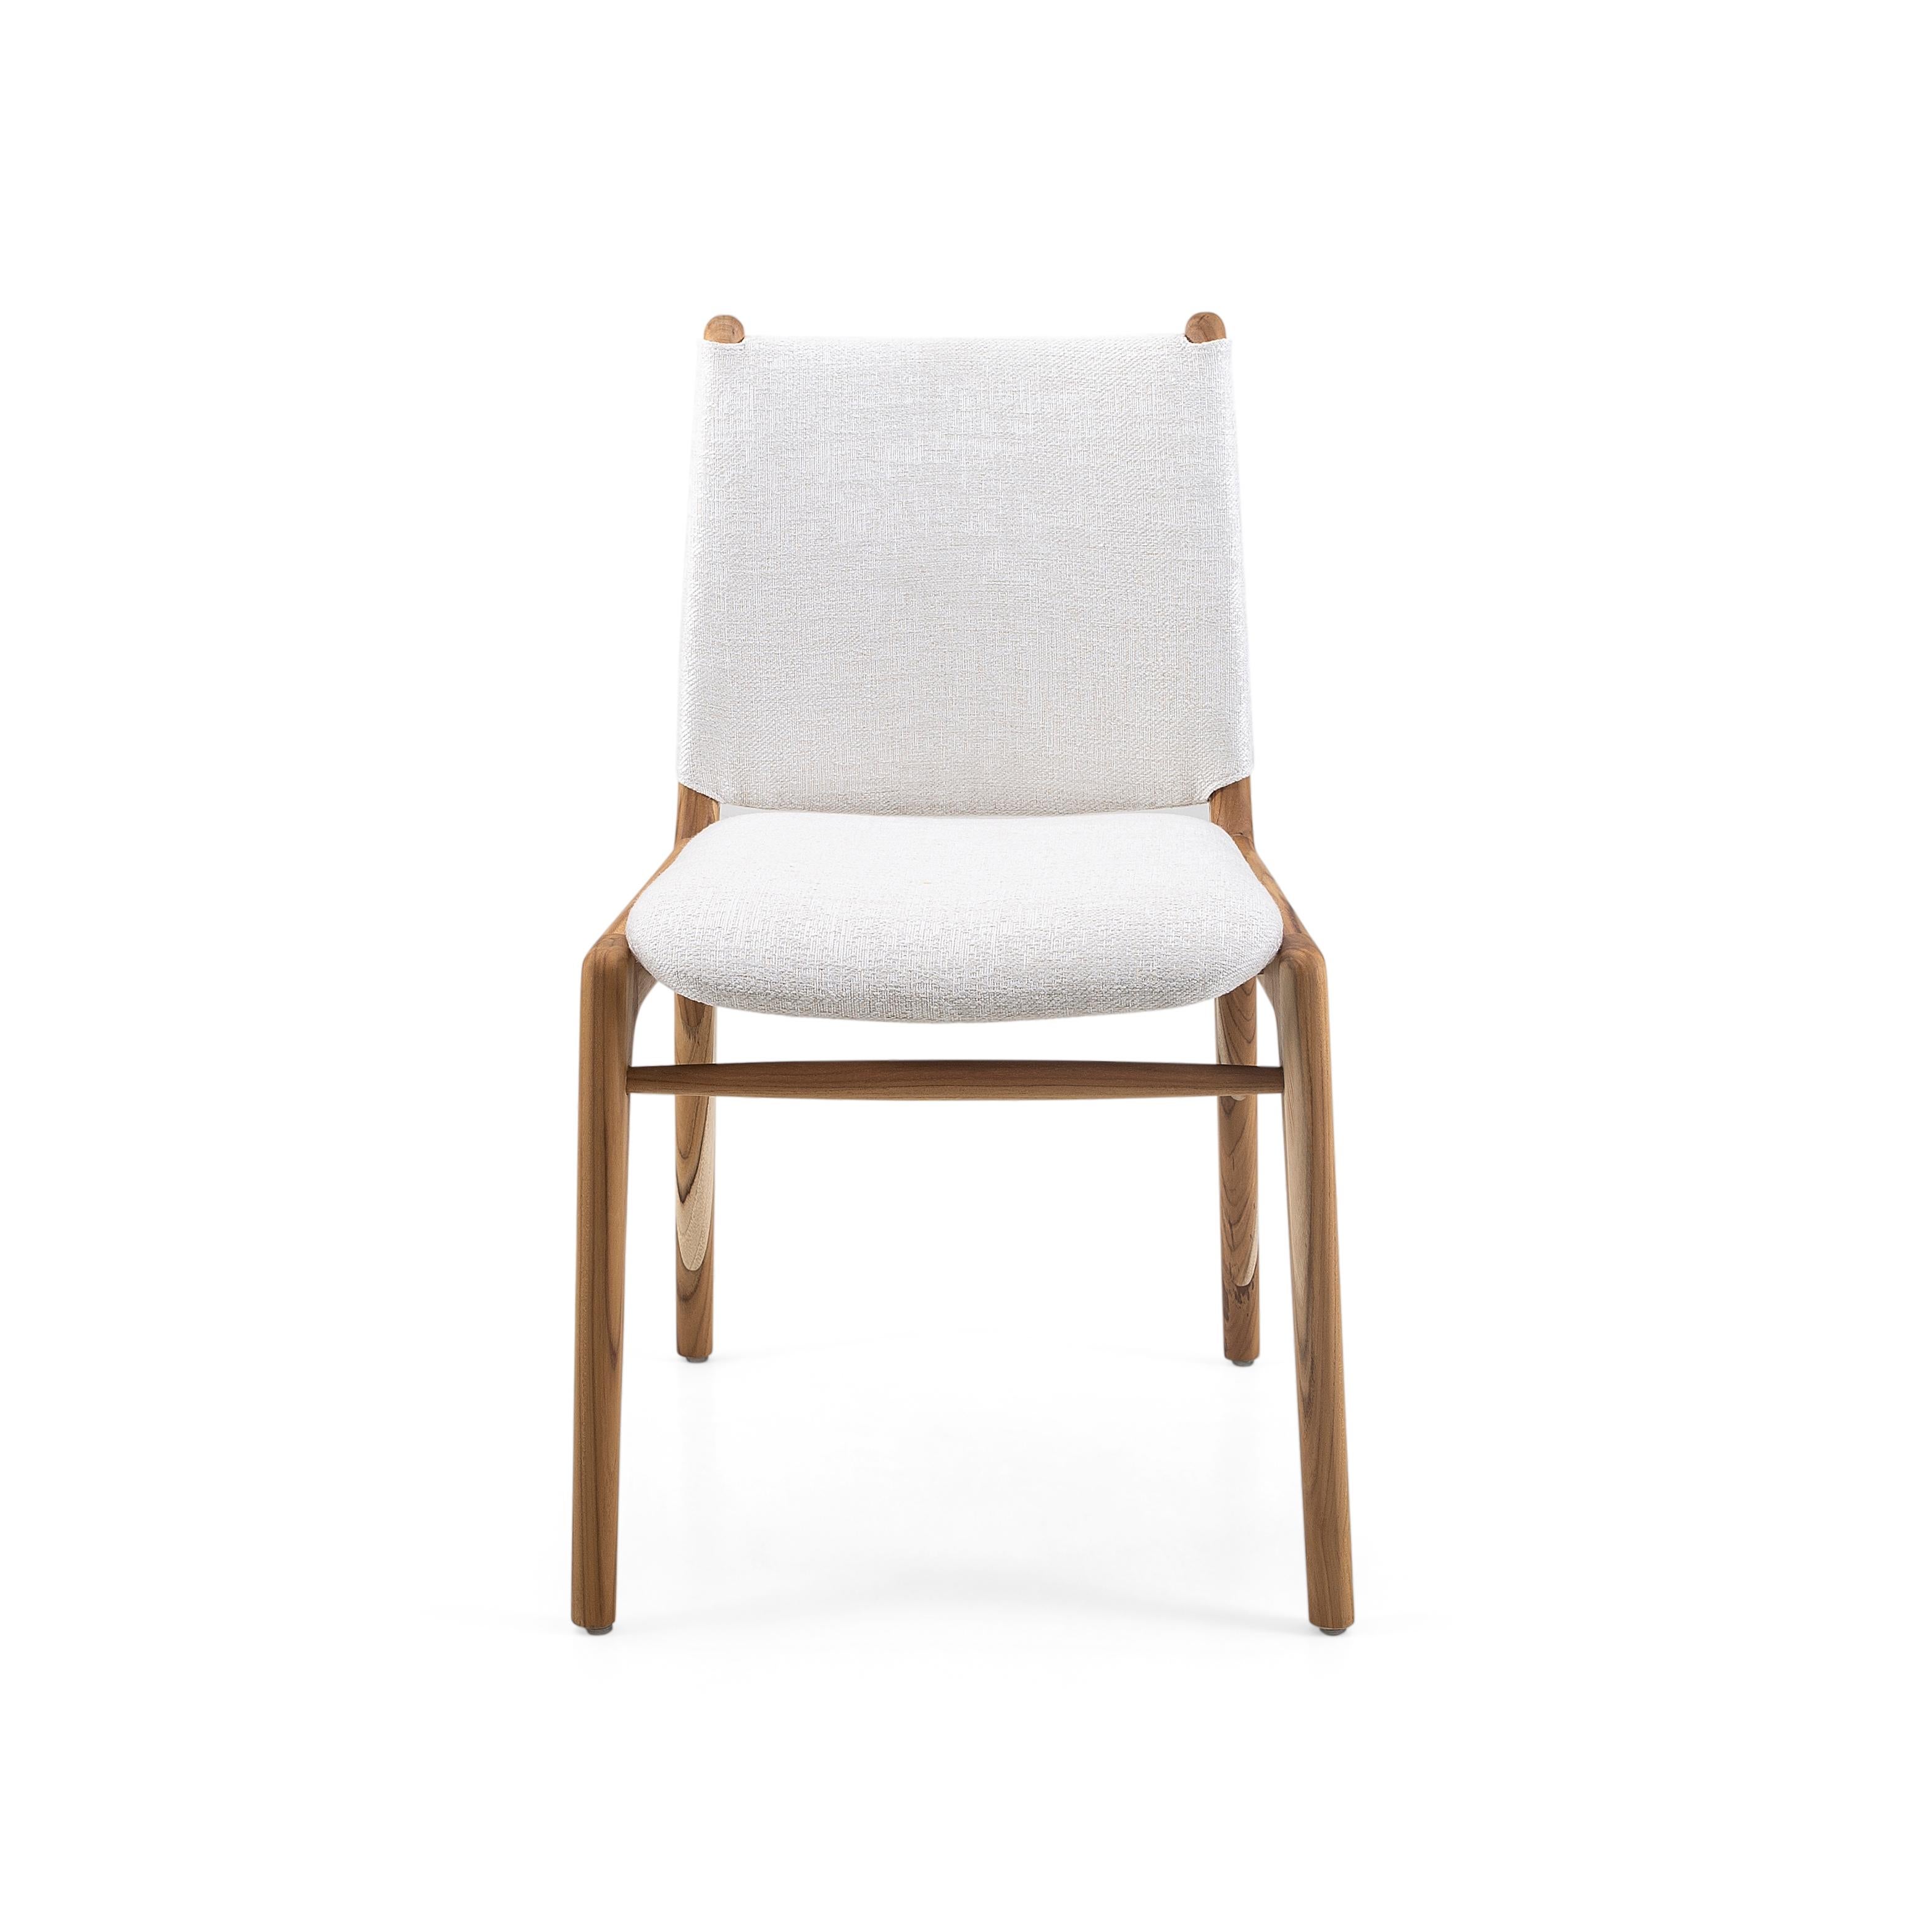 Brazilian Cappio Dining Chair in Teak Wood and Light Beige Fabric, set of 2 For Sale